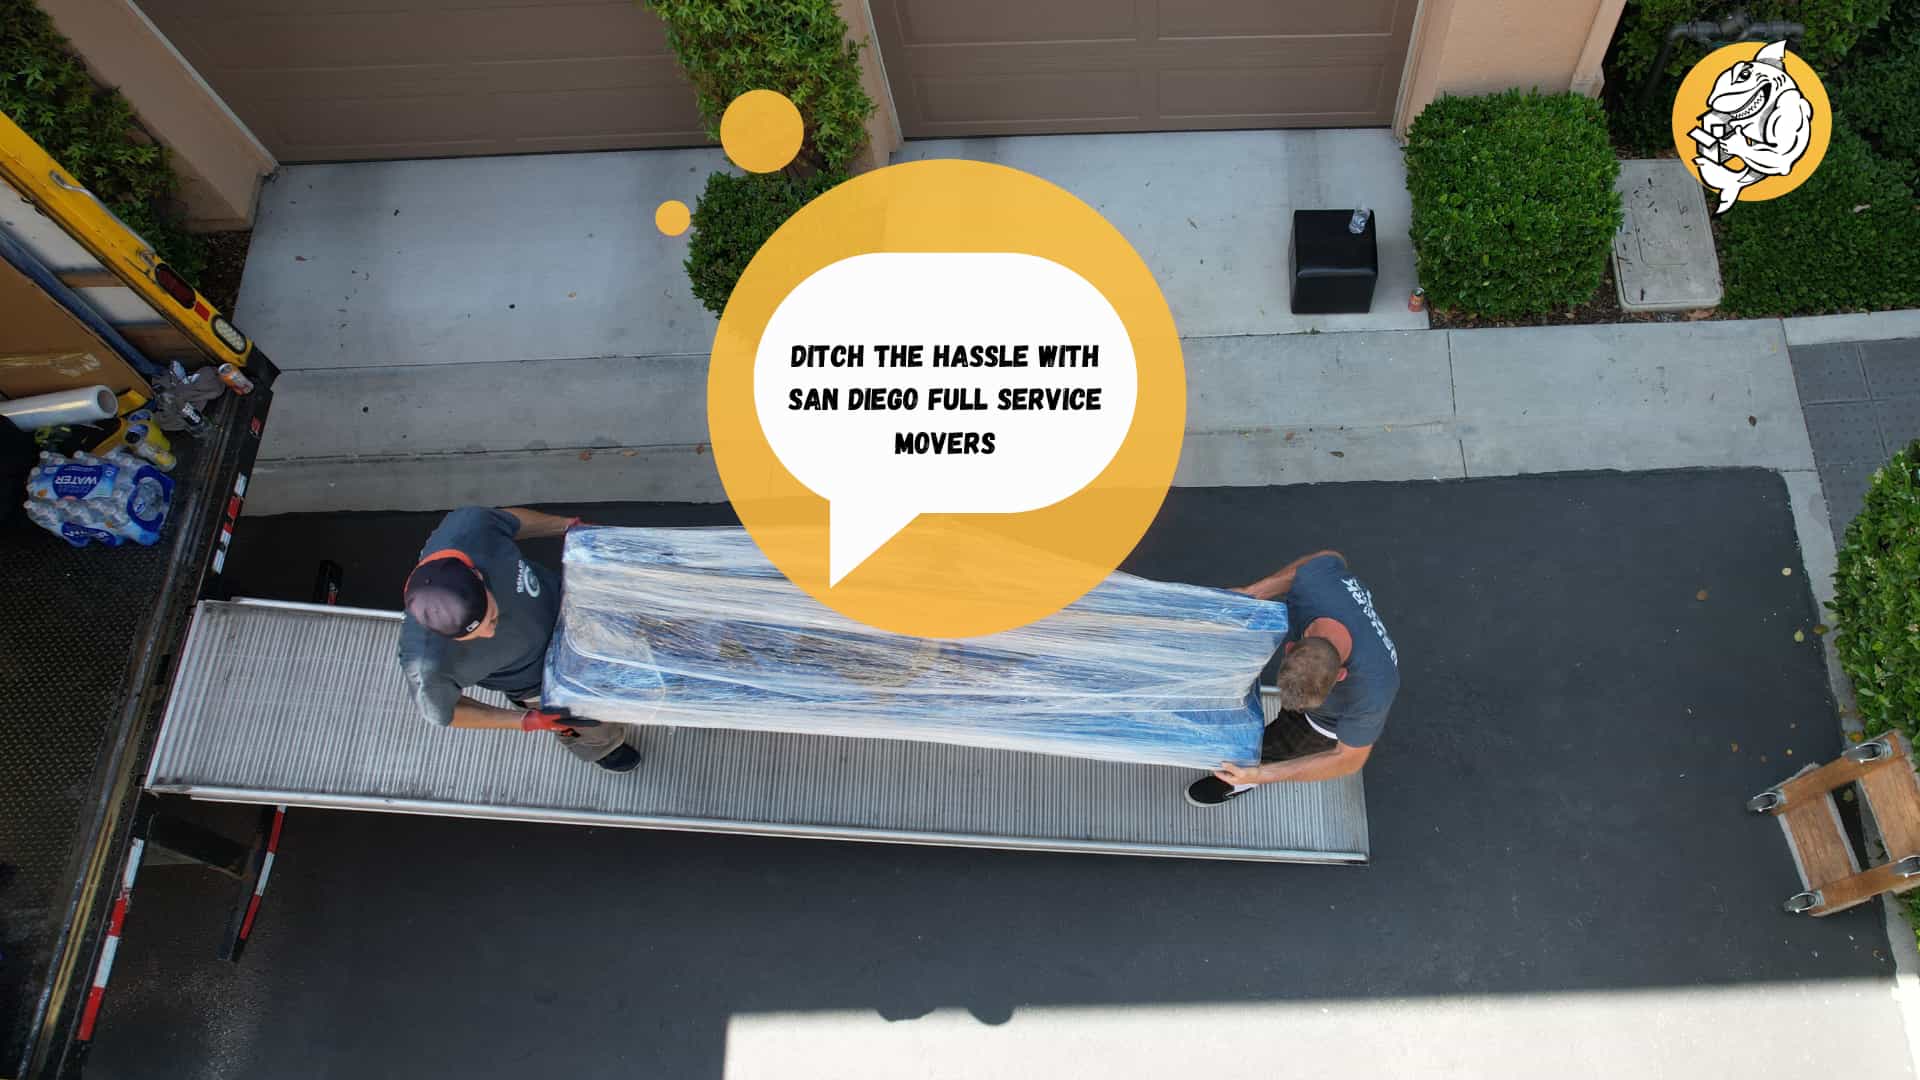 San Diego Full Service Movers